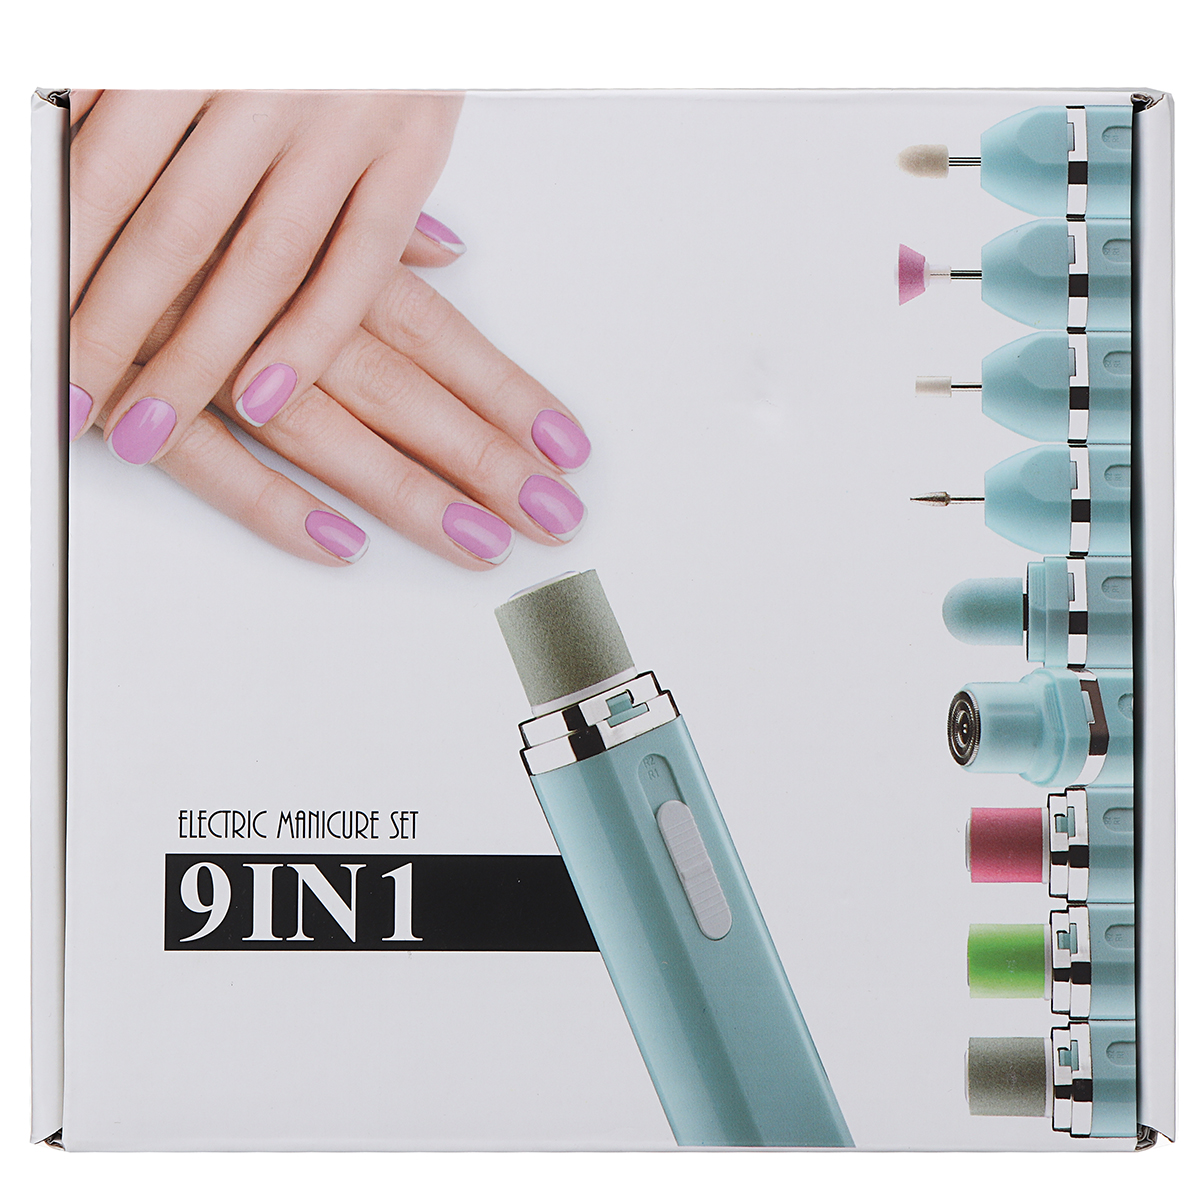 9-in-1-Manicure-Tools-Kit-Drill-Bits-Nail-Polishing-Gel-Remove-Grinder-Sanding-Paper-Shaver-1256112